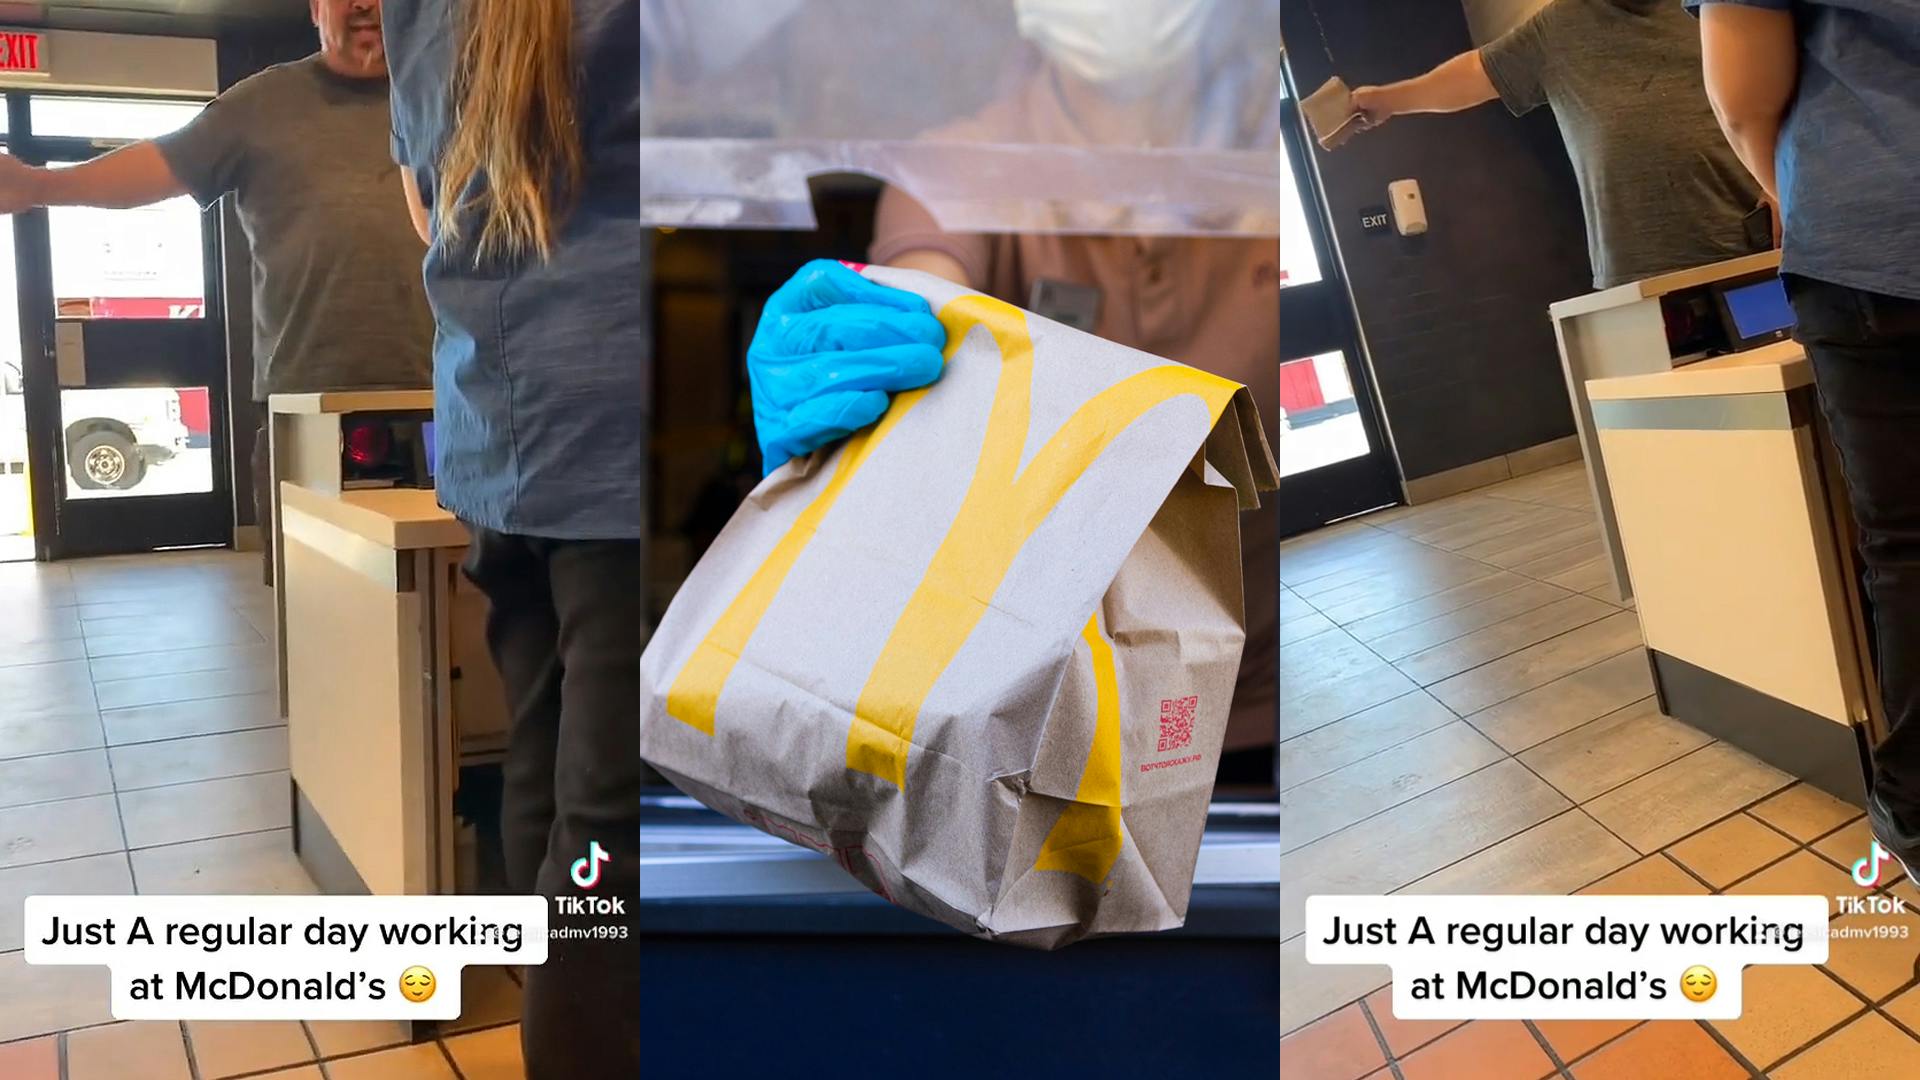 man yelling in McDonald's with arm out caption 'Just A regular day working at McDonald's' (l) McDonald's worker handing customer bag of food (c) man yelling in McDonald's with arm out holding napkins caption 'Just A regular day working at McDonald's' (r)